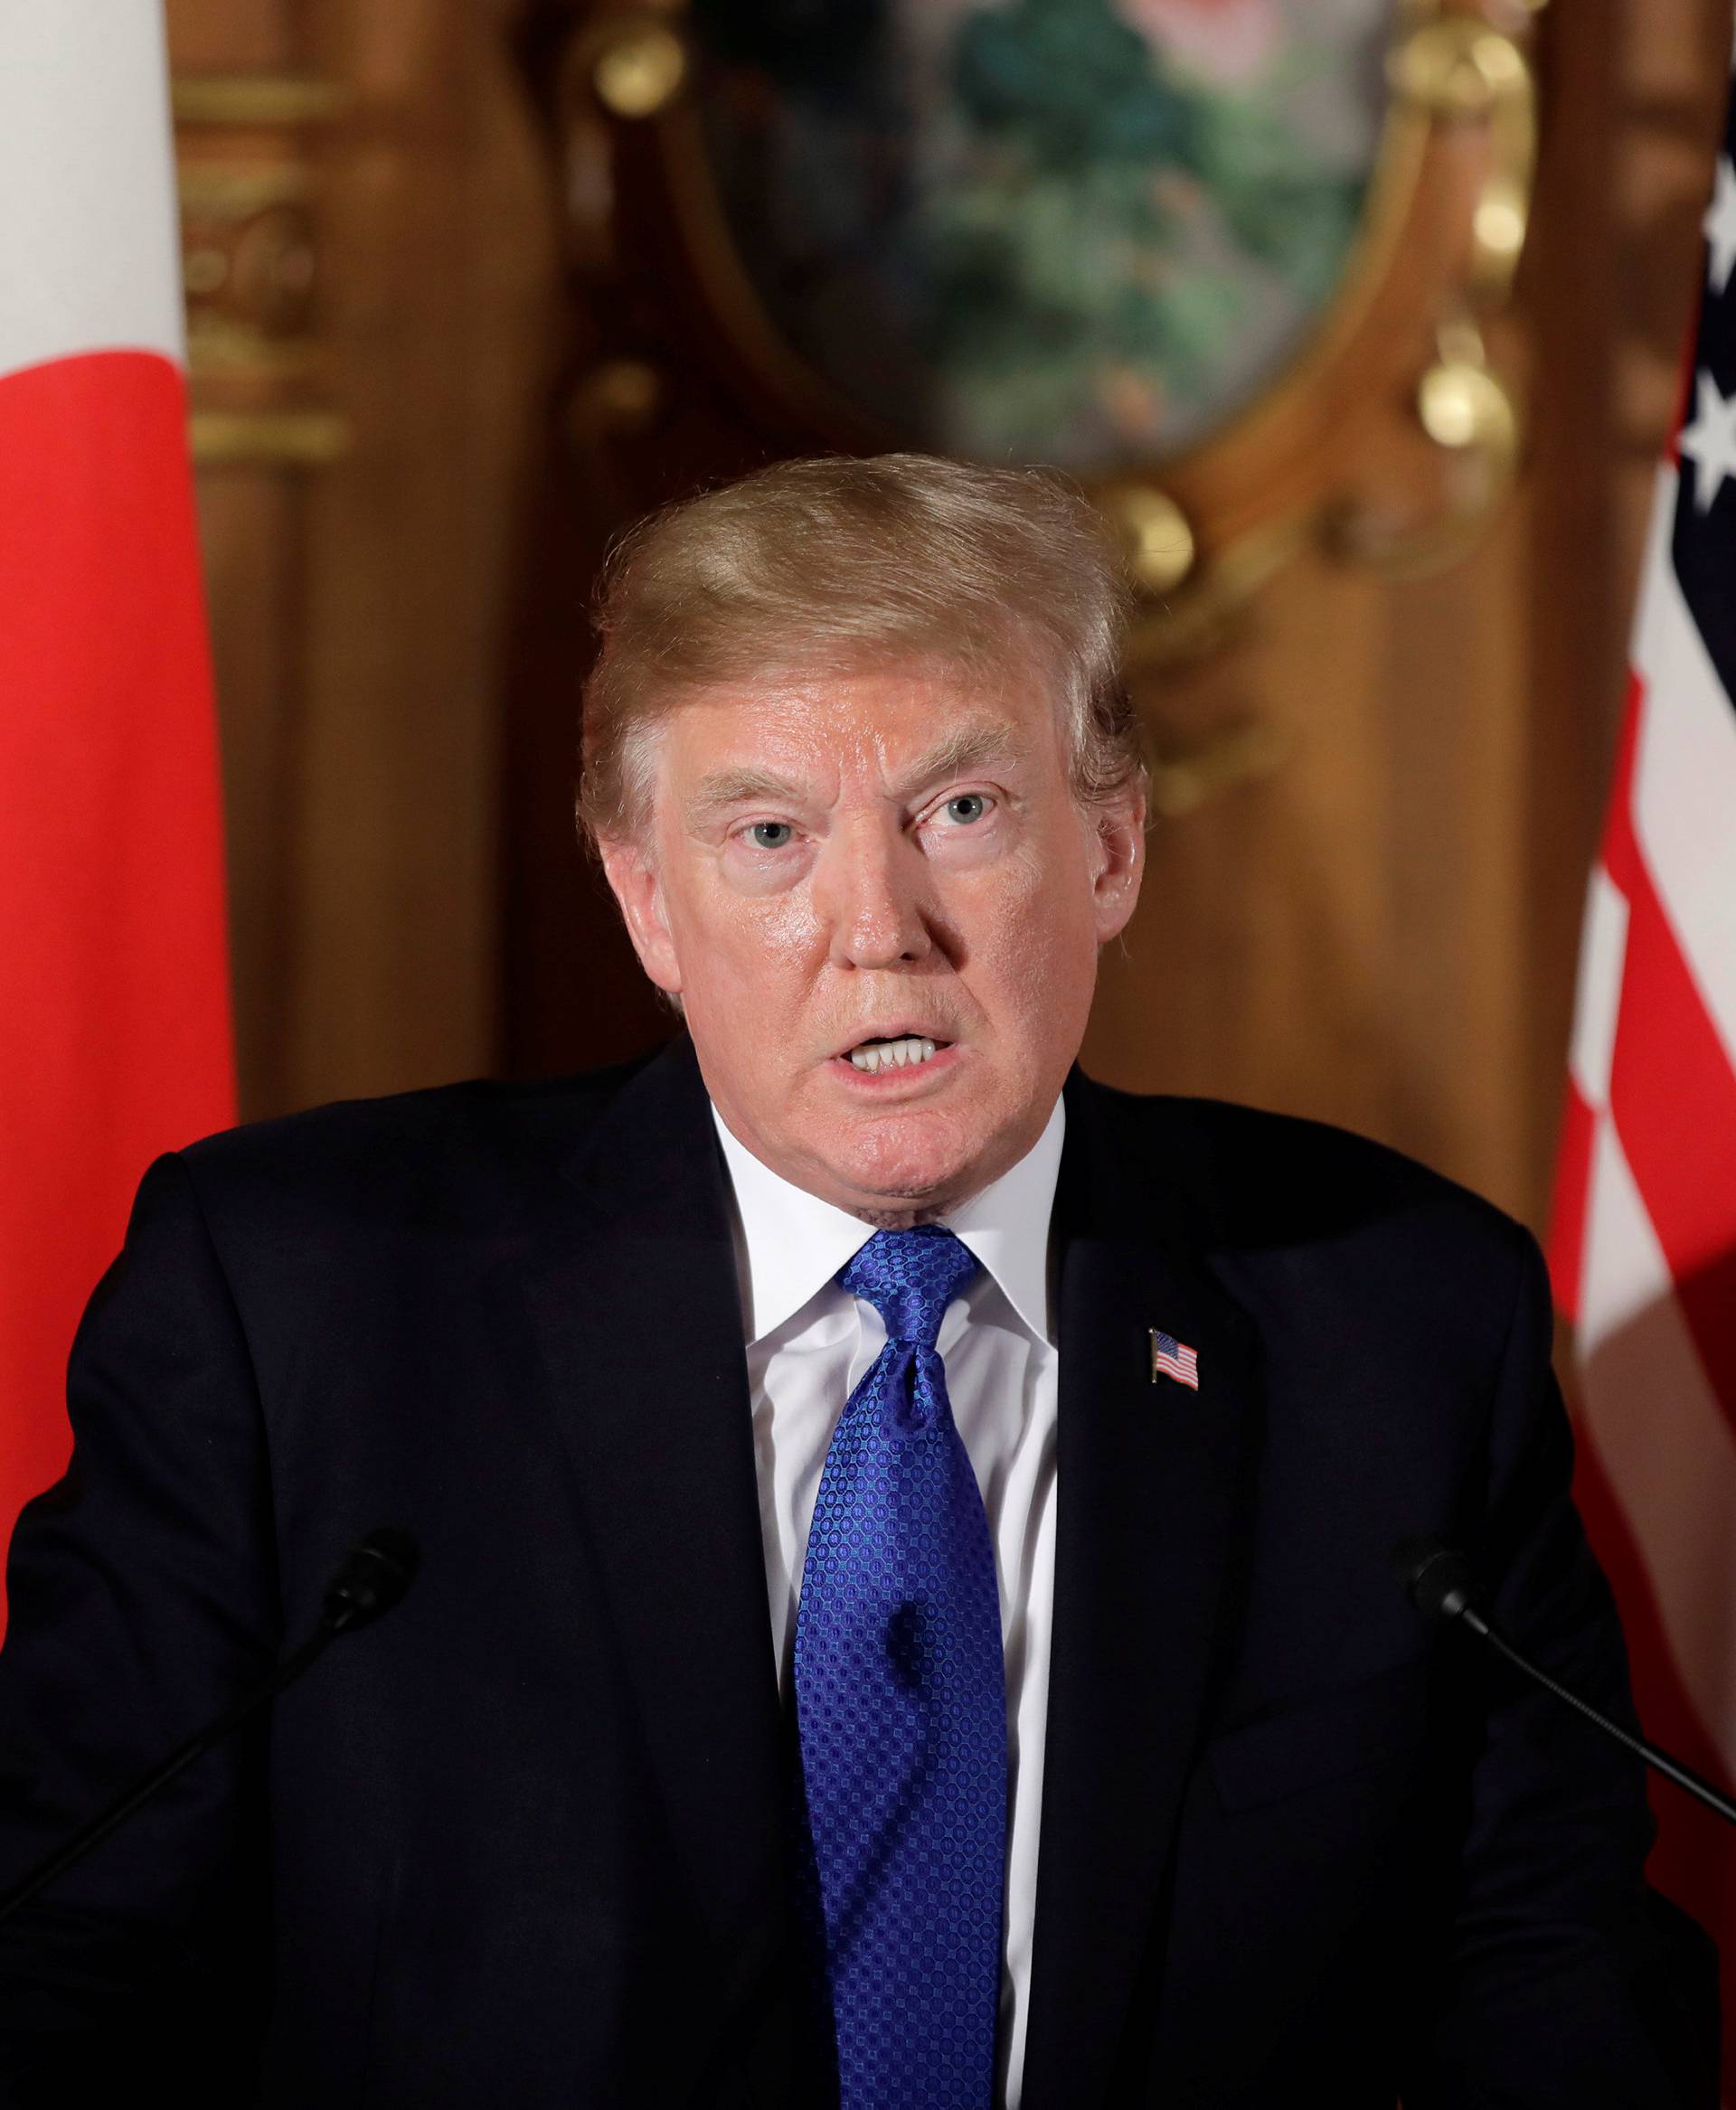 U.S. President Donald Trump speaks during a news conference with Japan's Prime Minister Shinzo Abe at Akasaka Palace in Tokyo